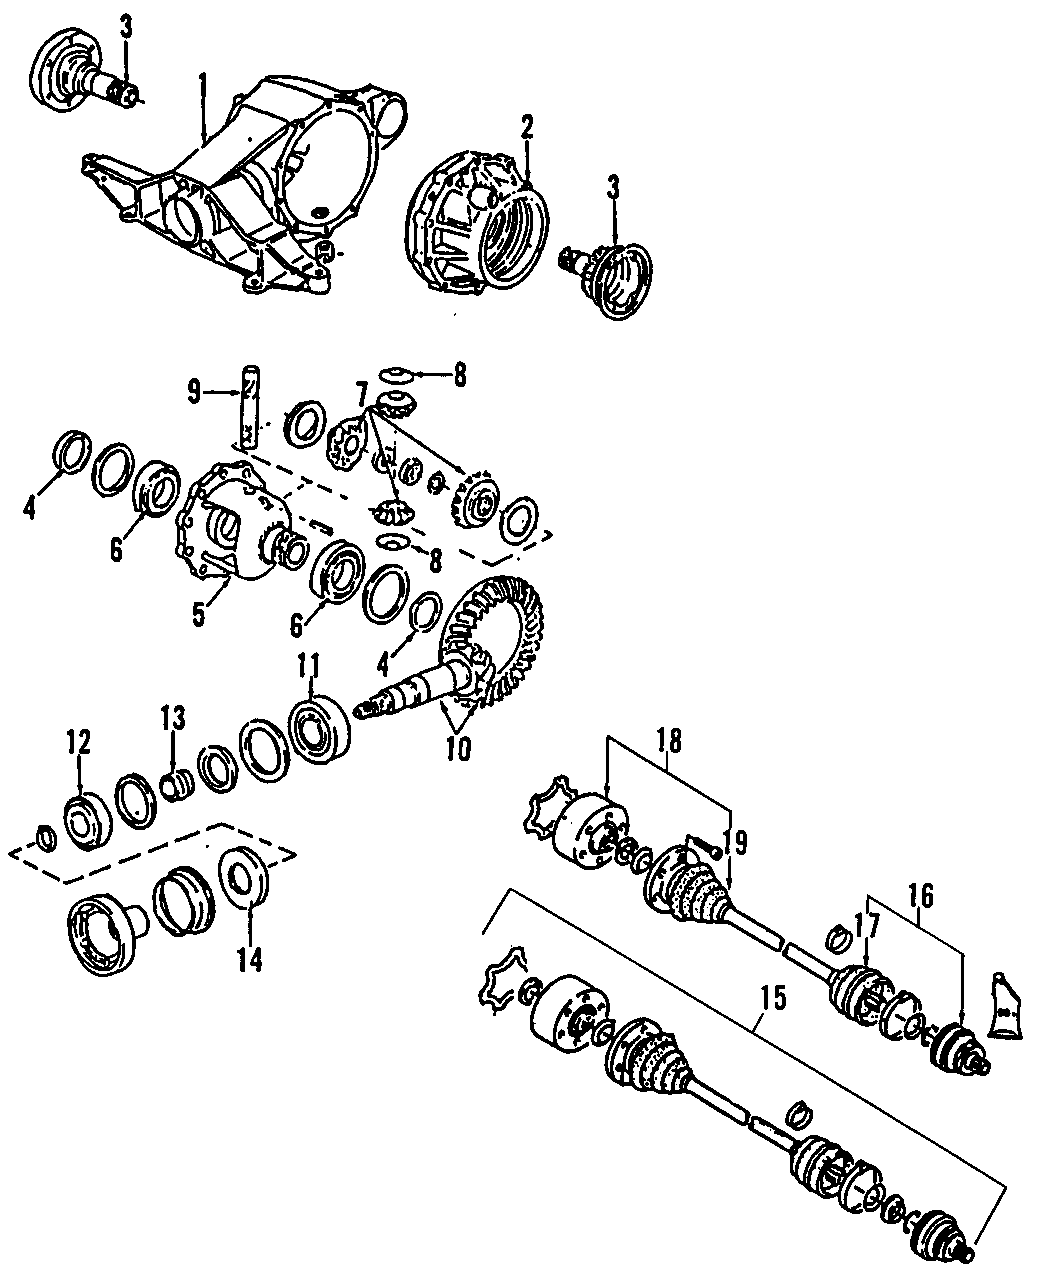 15DRIVE AXLES. REAR AXLE. AXLE SHAFTS & JOINTS. DIFFERENTIAL. PROPELLER SHAFT.https://images.simplepart.com/images/parts/motor/fullsize/F208150.png